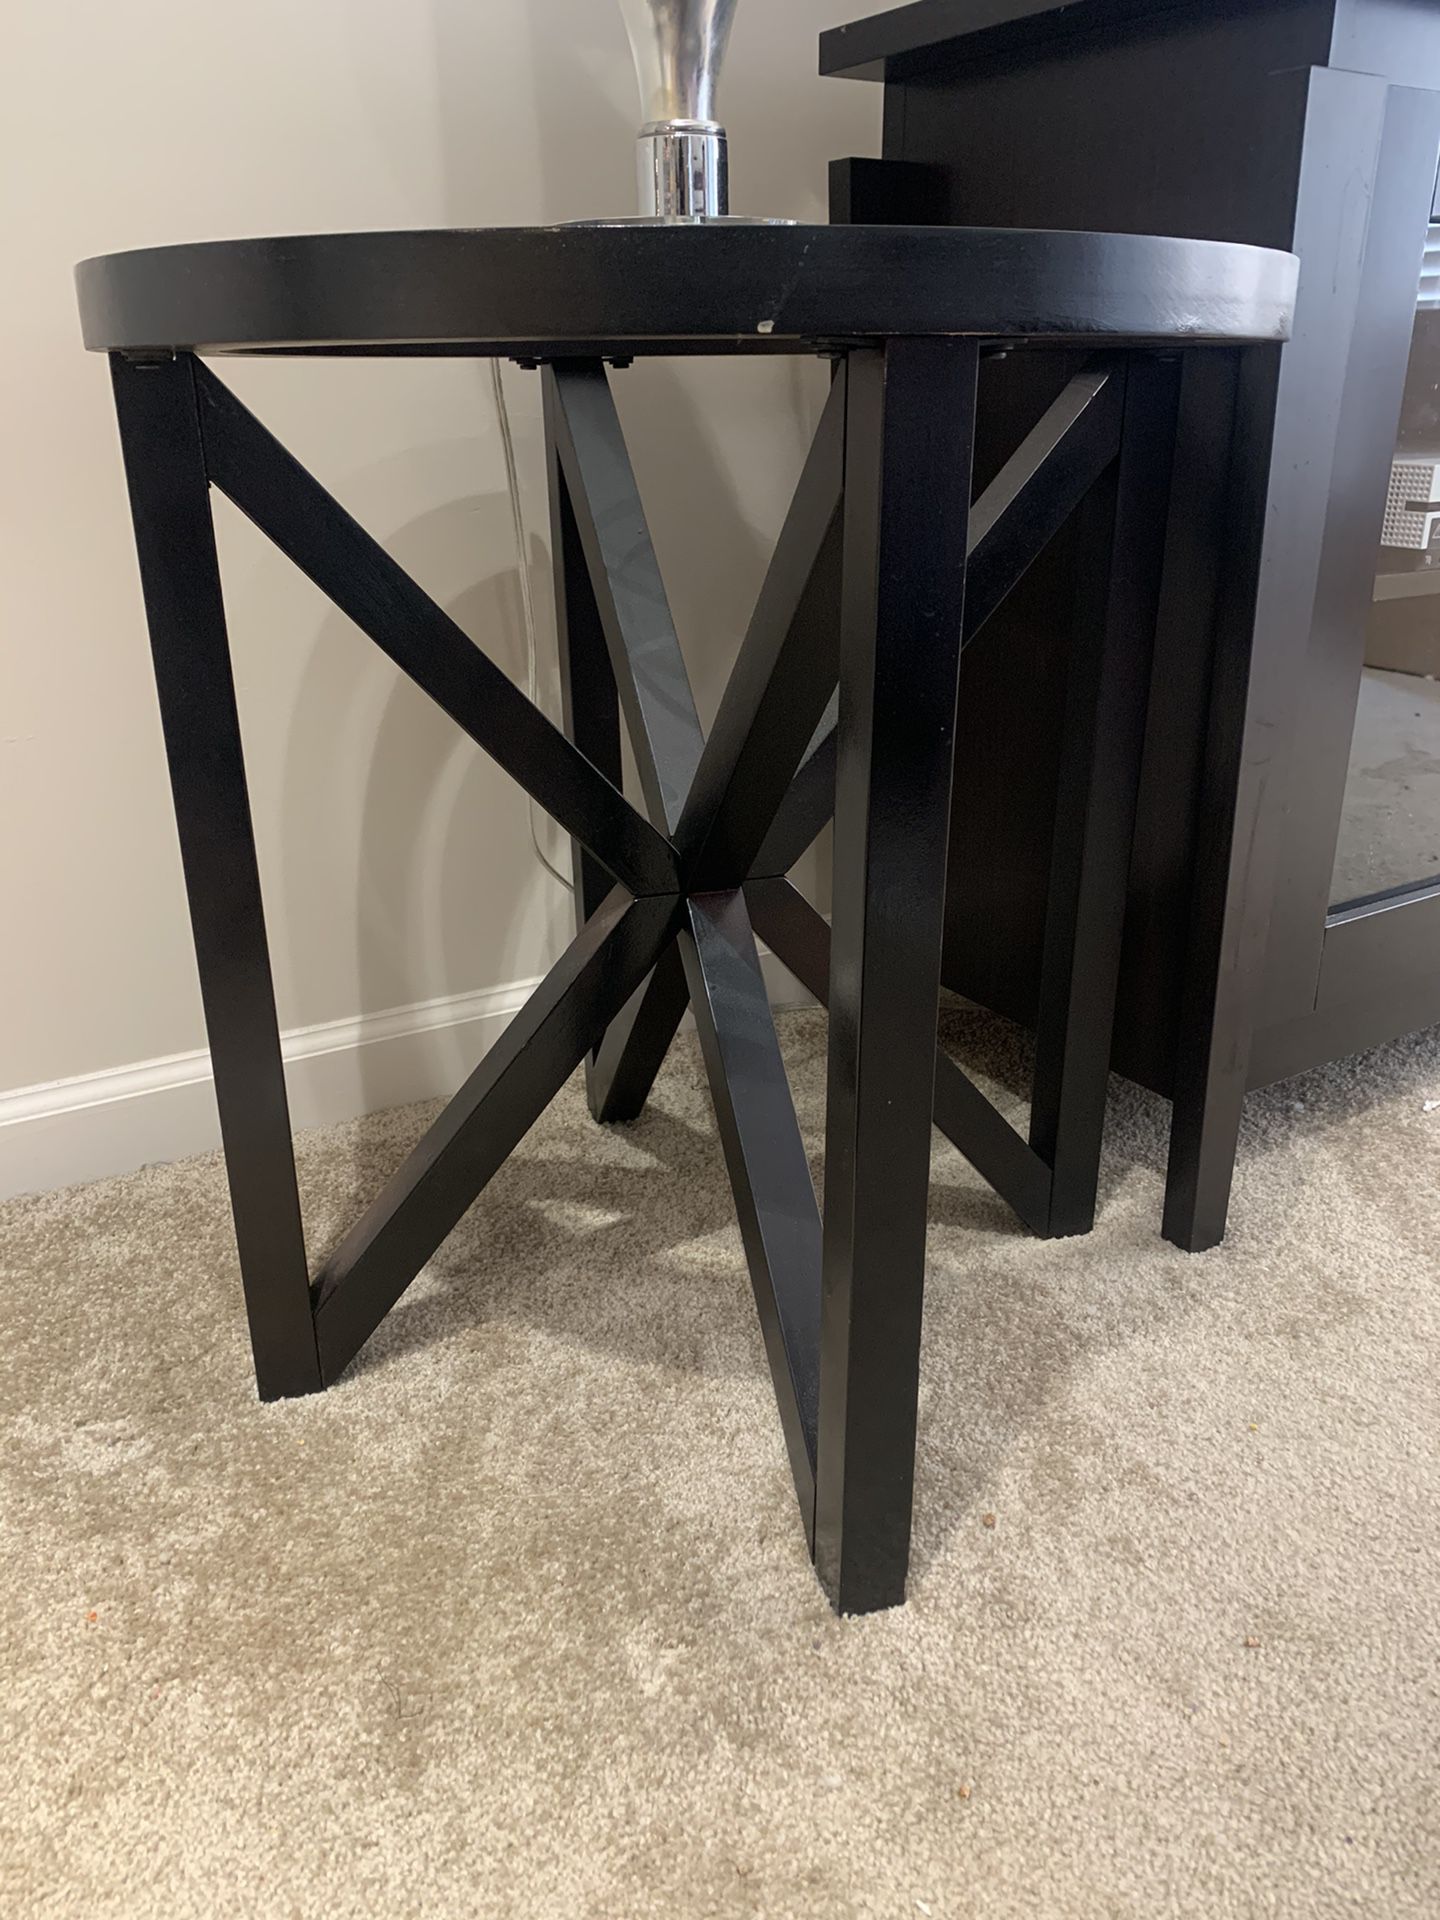 End tables for sale